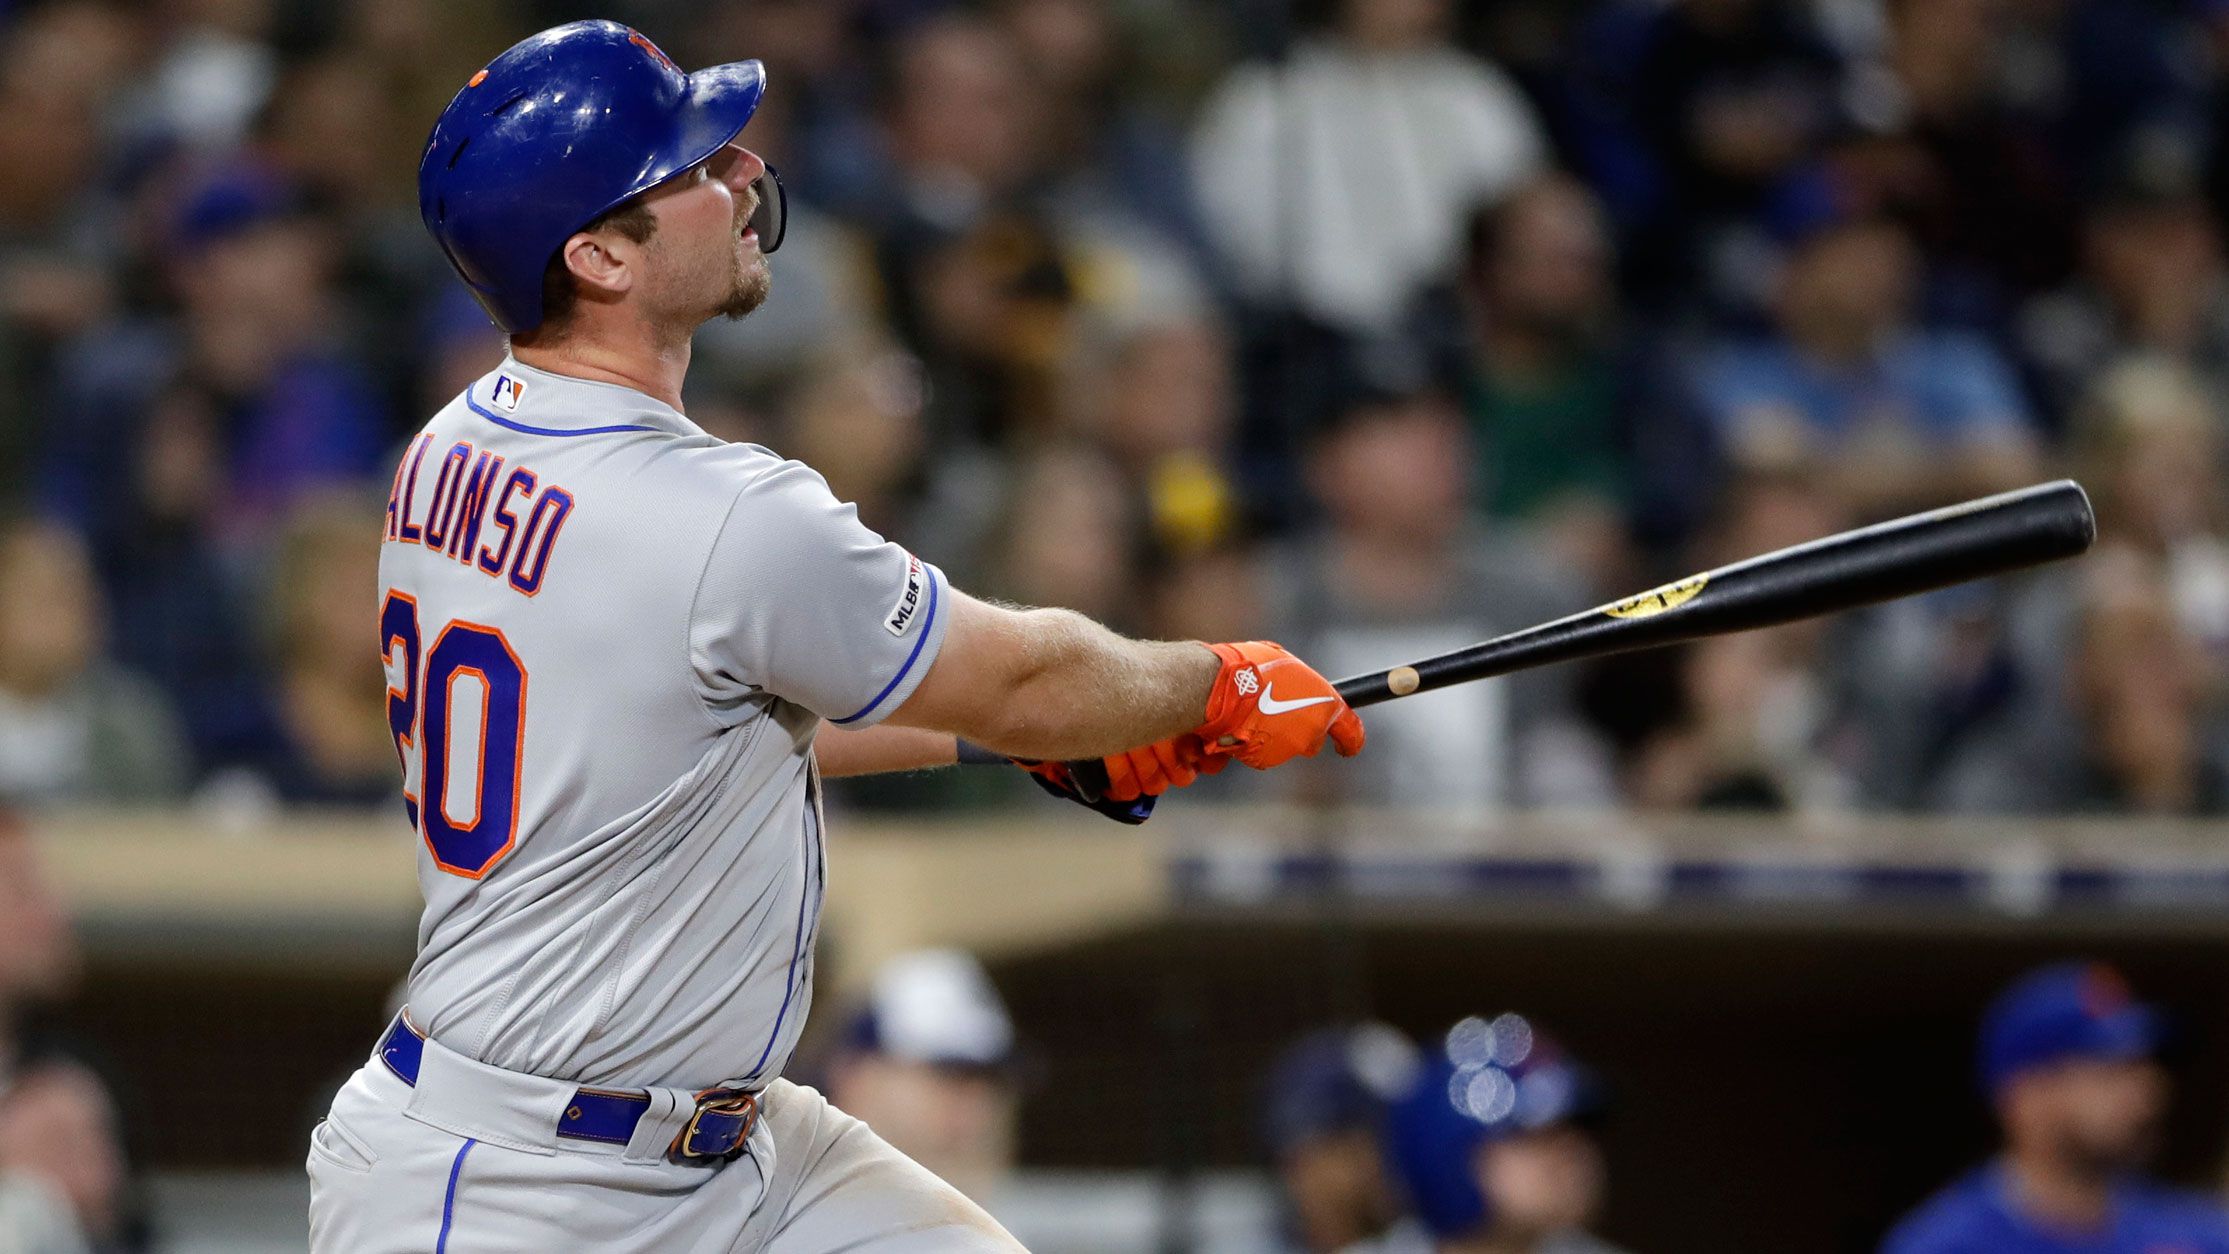 New York Mets news: Plant High School retires Pete Alonso's jersey